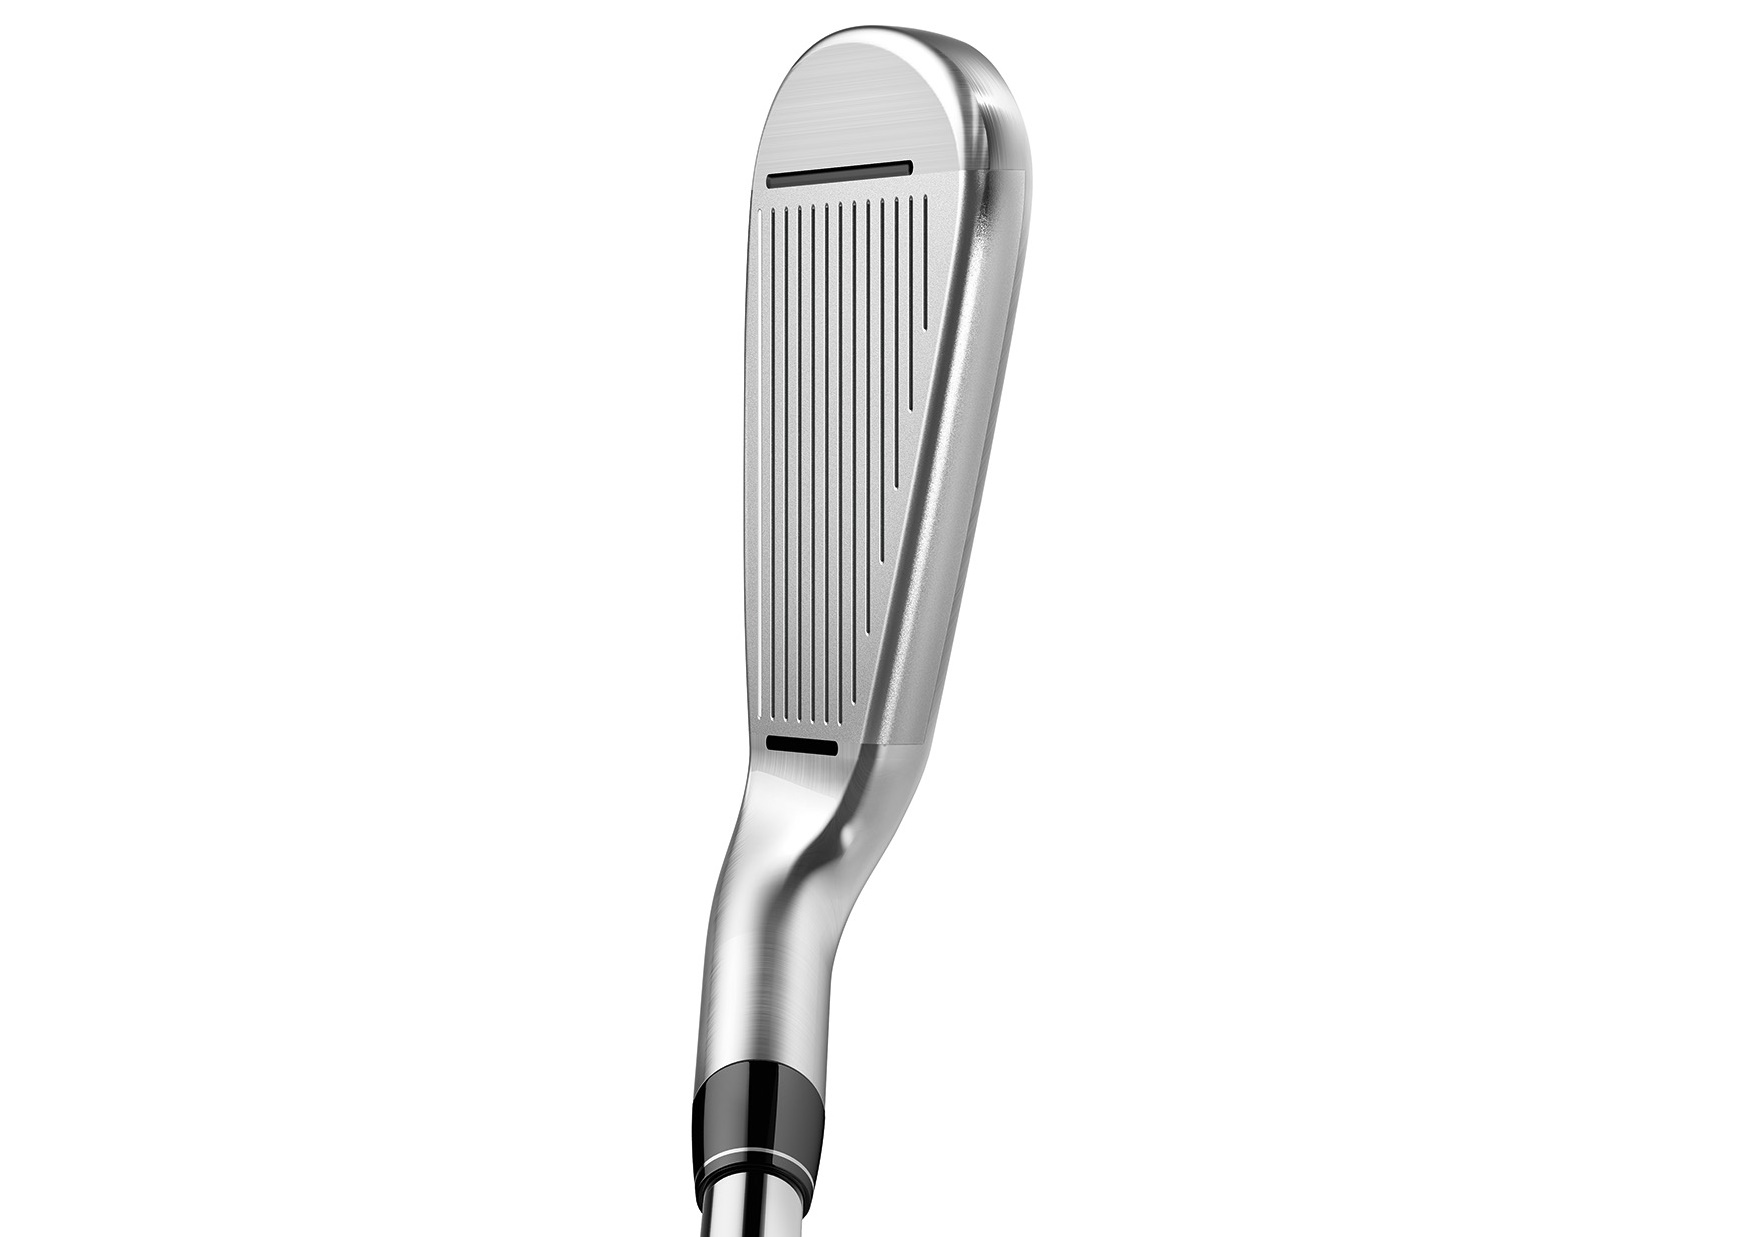 TaylorMade M1 iron review